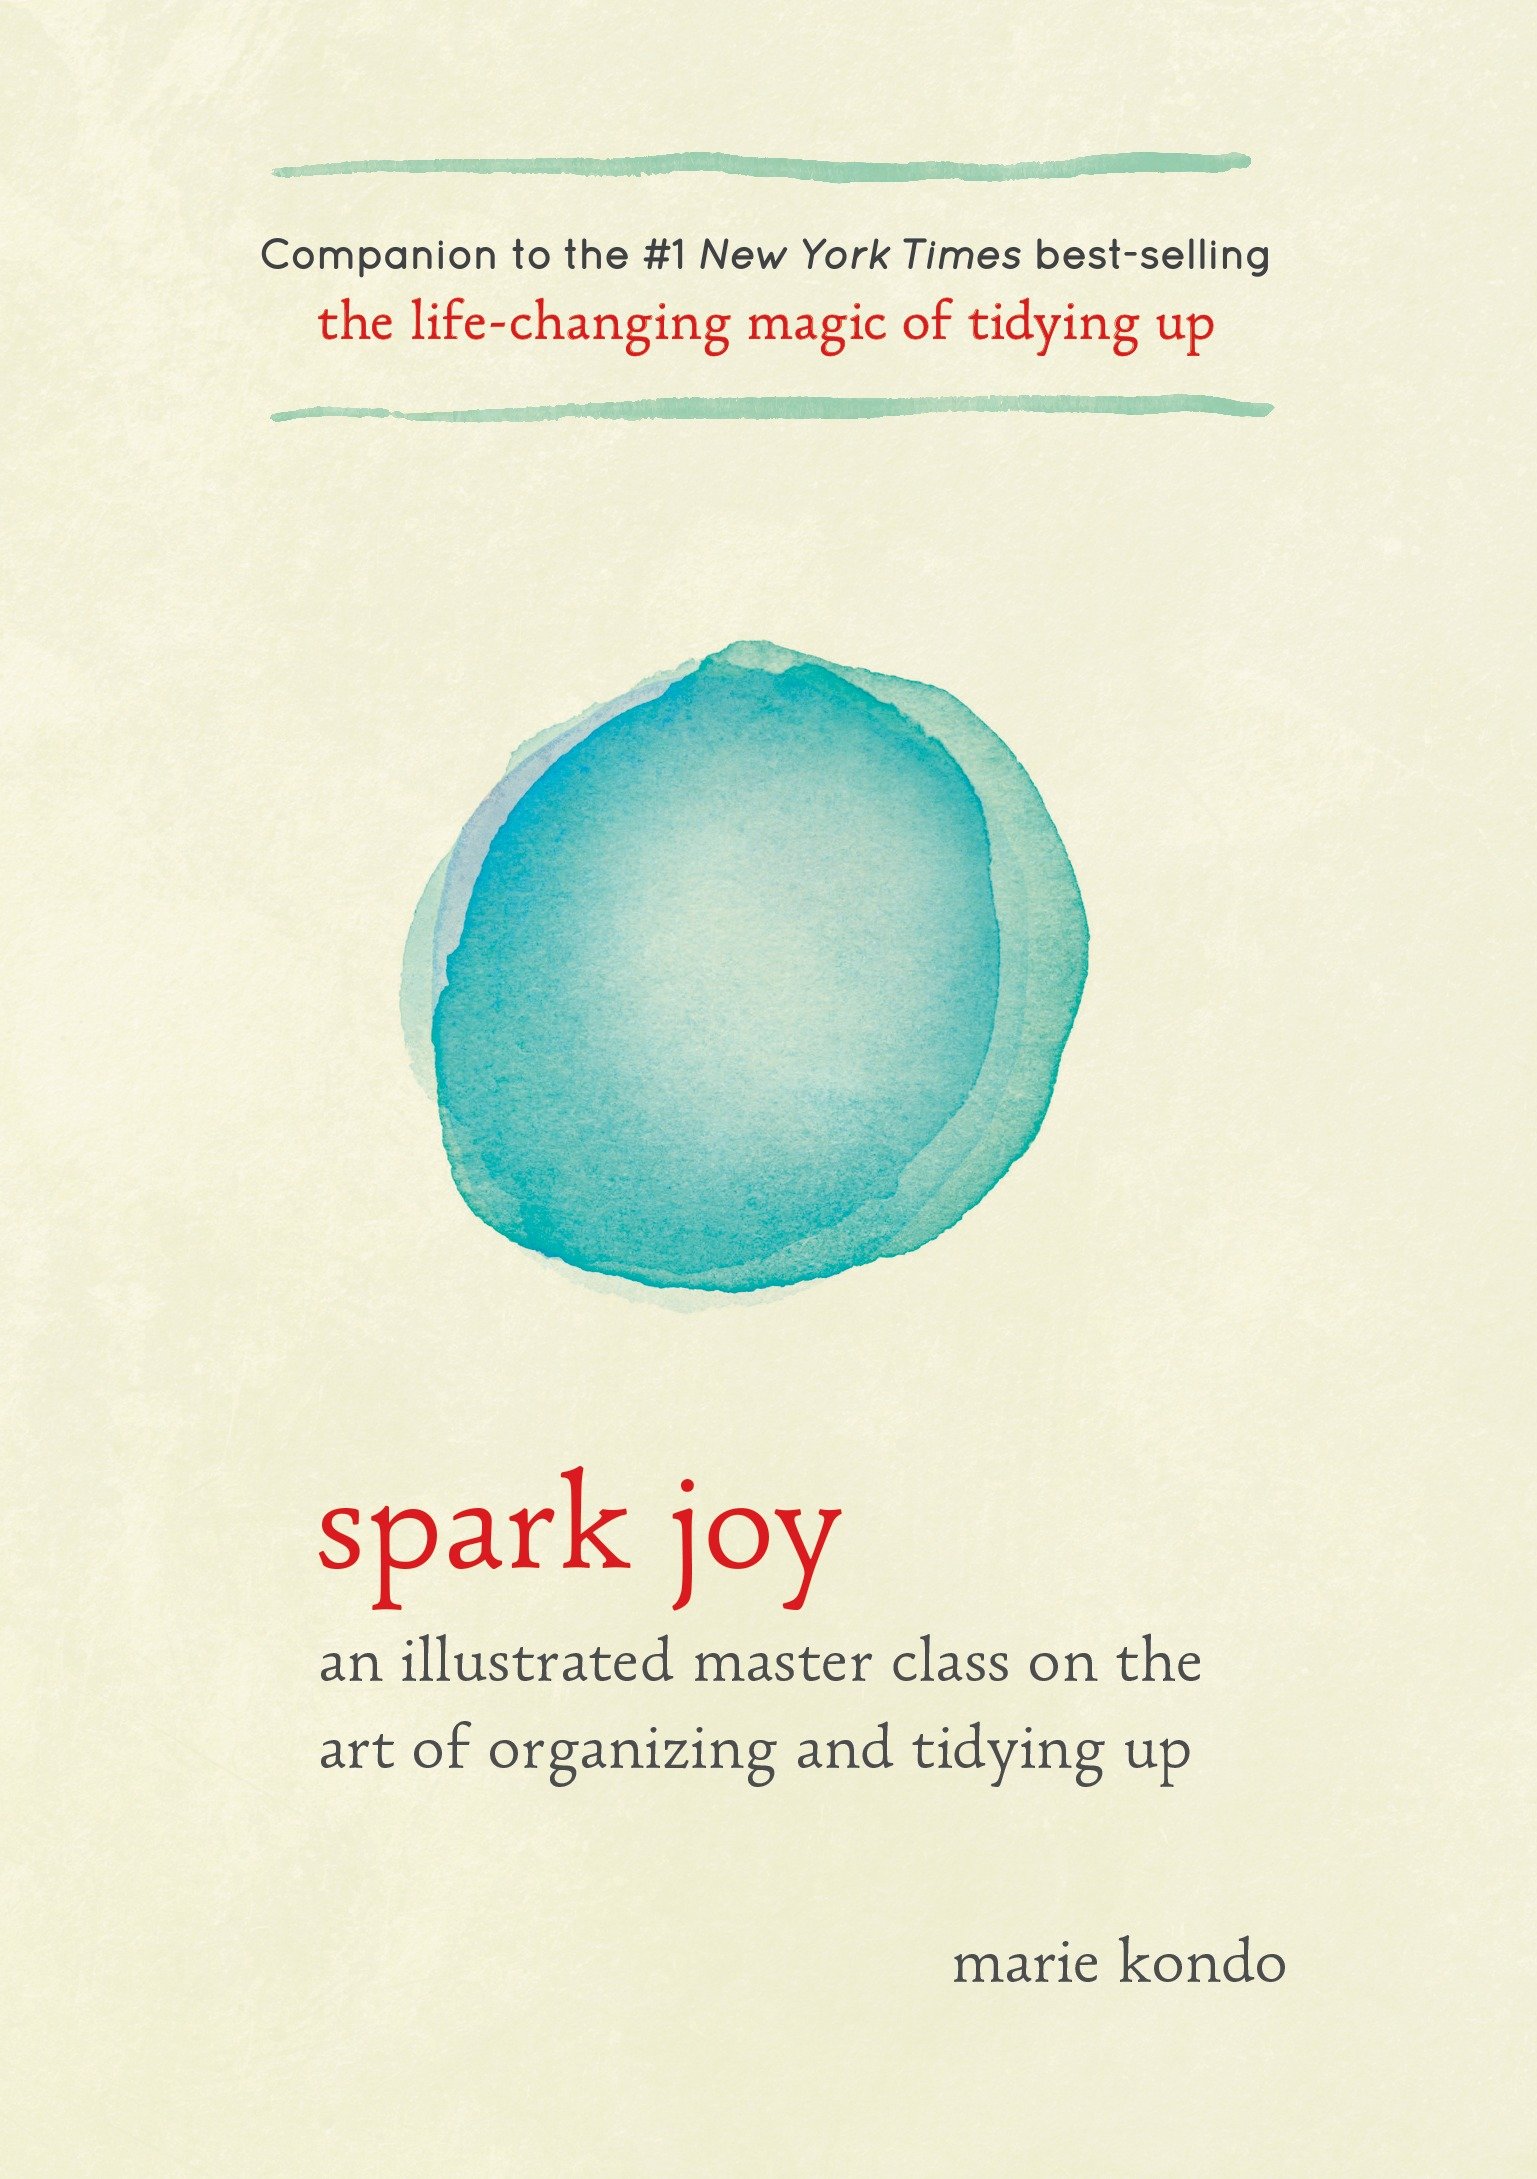 Spark joy an illustrated master class on the art of organizing and tidying up cover image